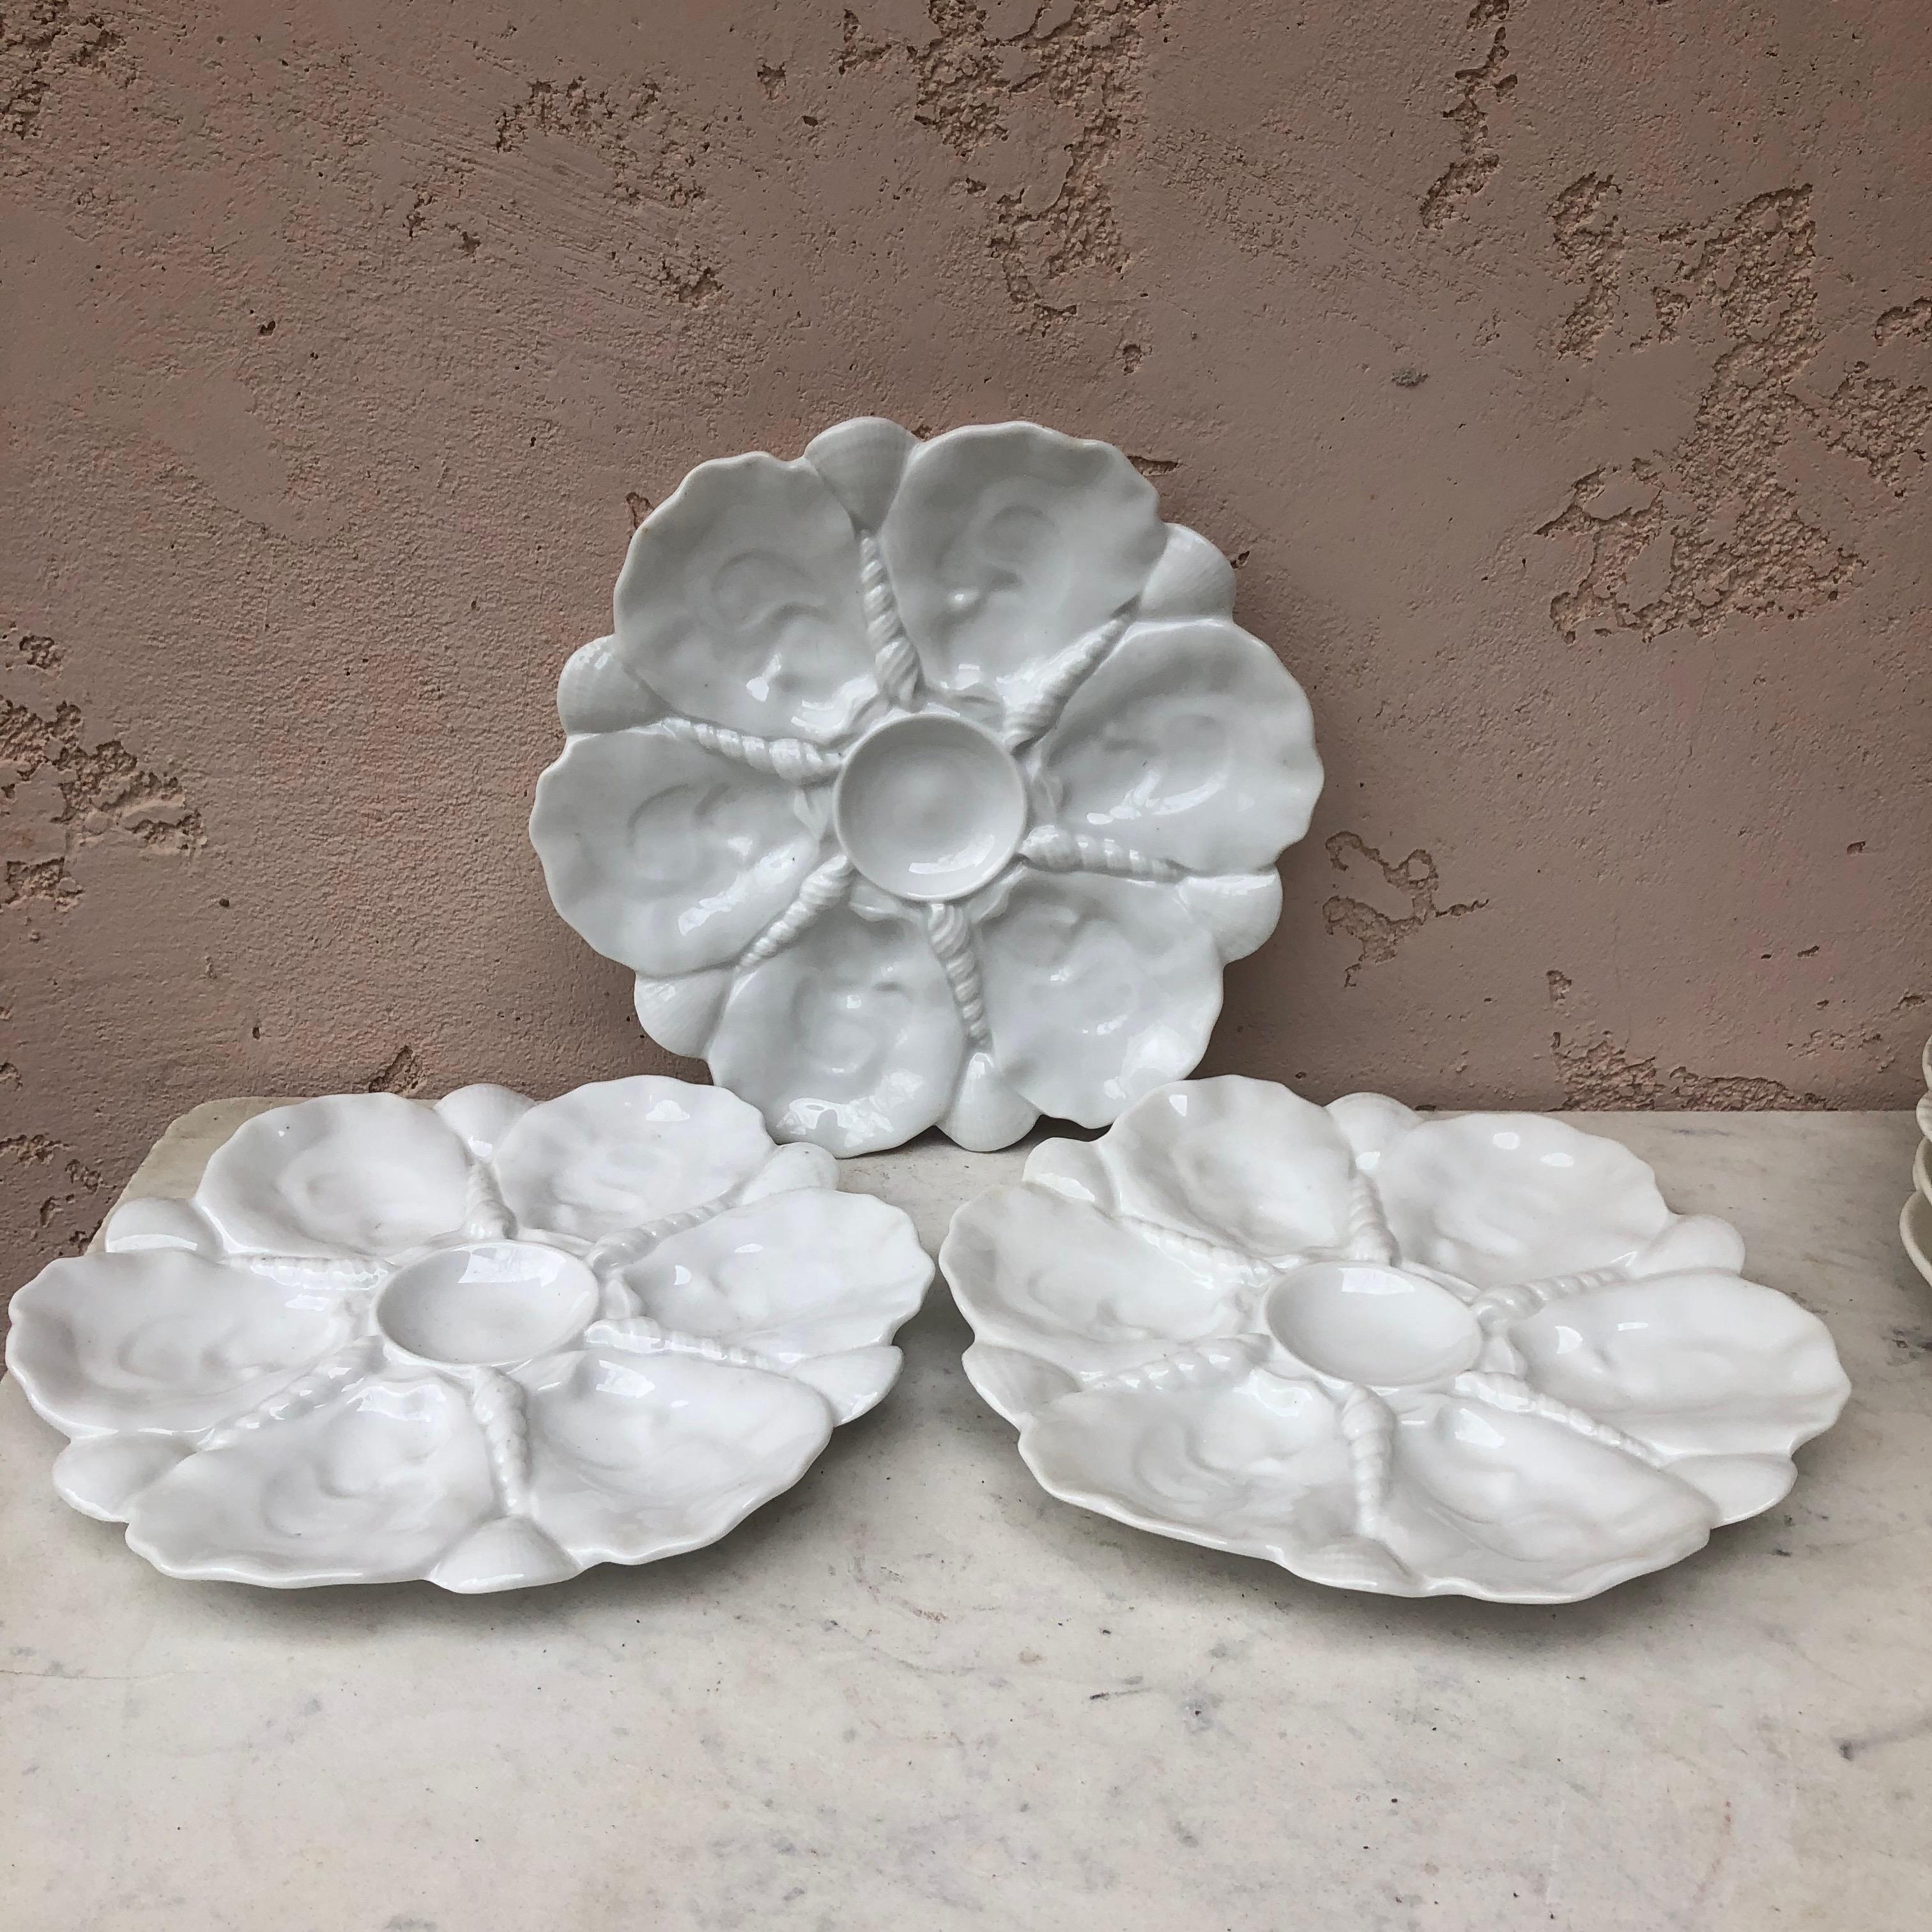 Late 19th Century 19th Century Minton White Majolica Oyster Plate For Sale